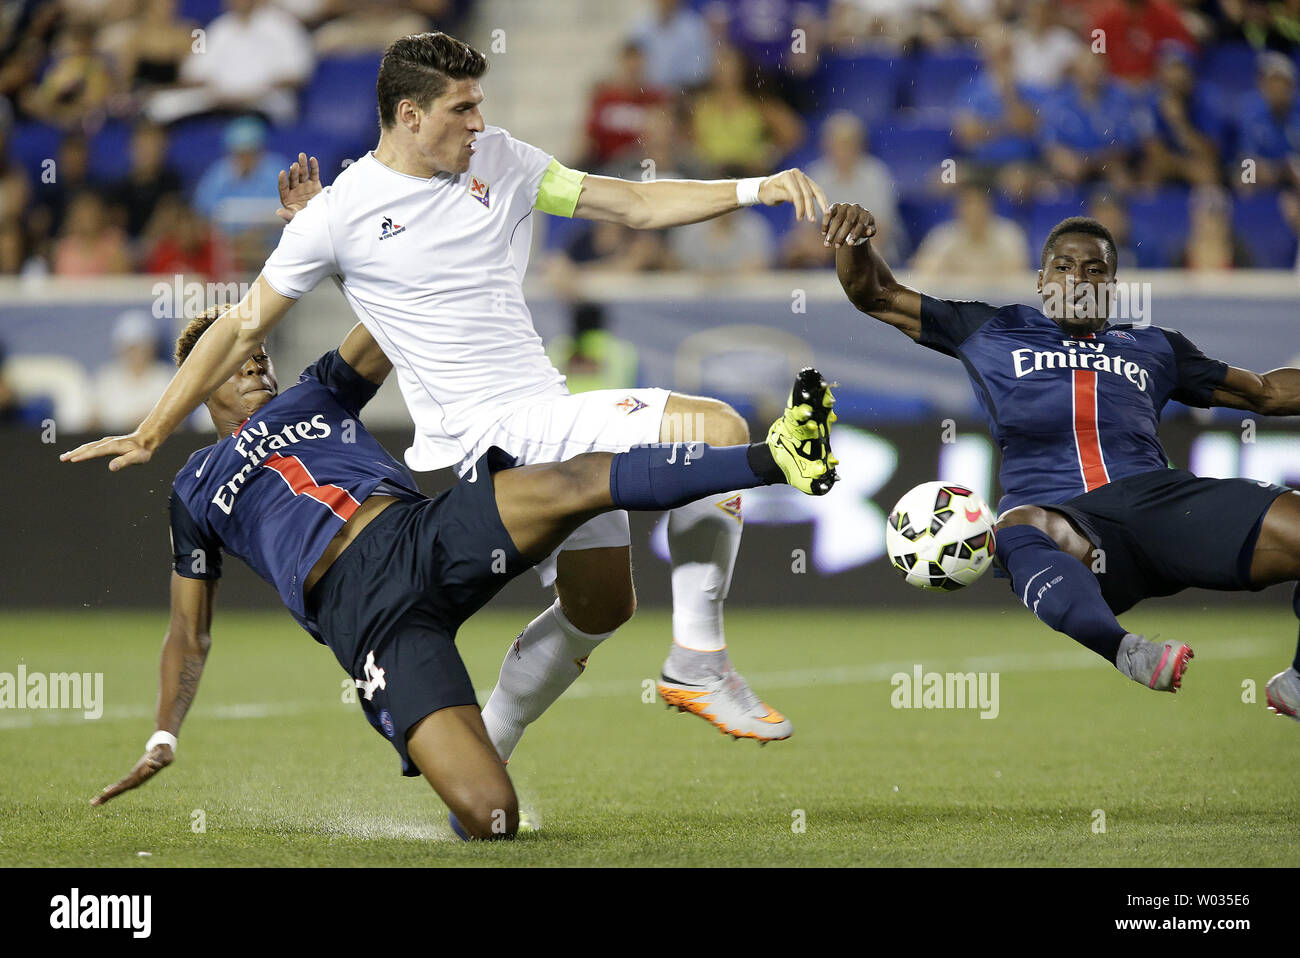 Paris Saint-Germain Blaise Matuidi and Serge Aurier surround ACF Fiorentina Mario Gomez in the first half at the 2015 International Champions Cup North America at Red Bull Arena in Harrison, NJ on July 21, 2015. 2015 begins the International Champions Cup's global expansion, with the tournament kicking off three team editions in both Australia and in China. Photo by John Angelillo/UPI Stock Photo